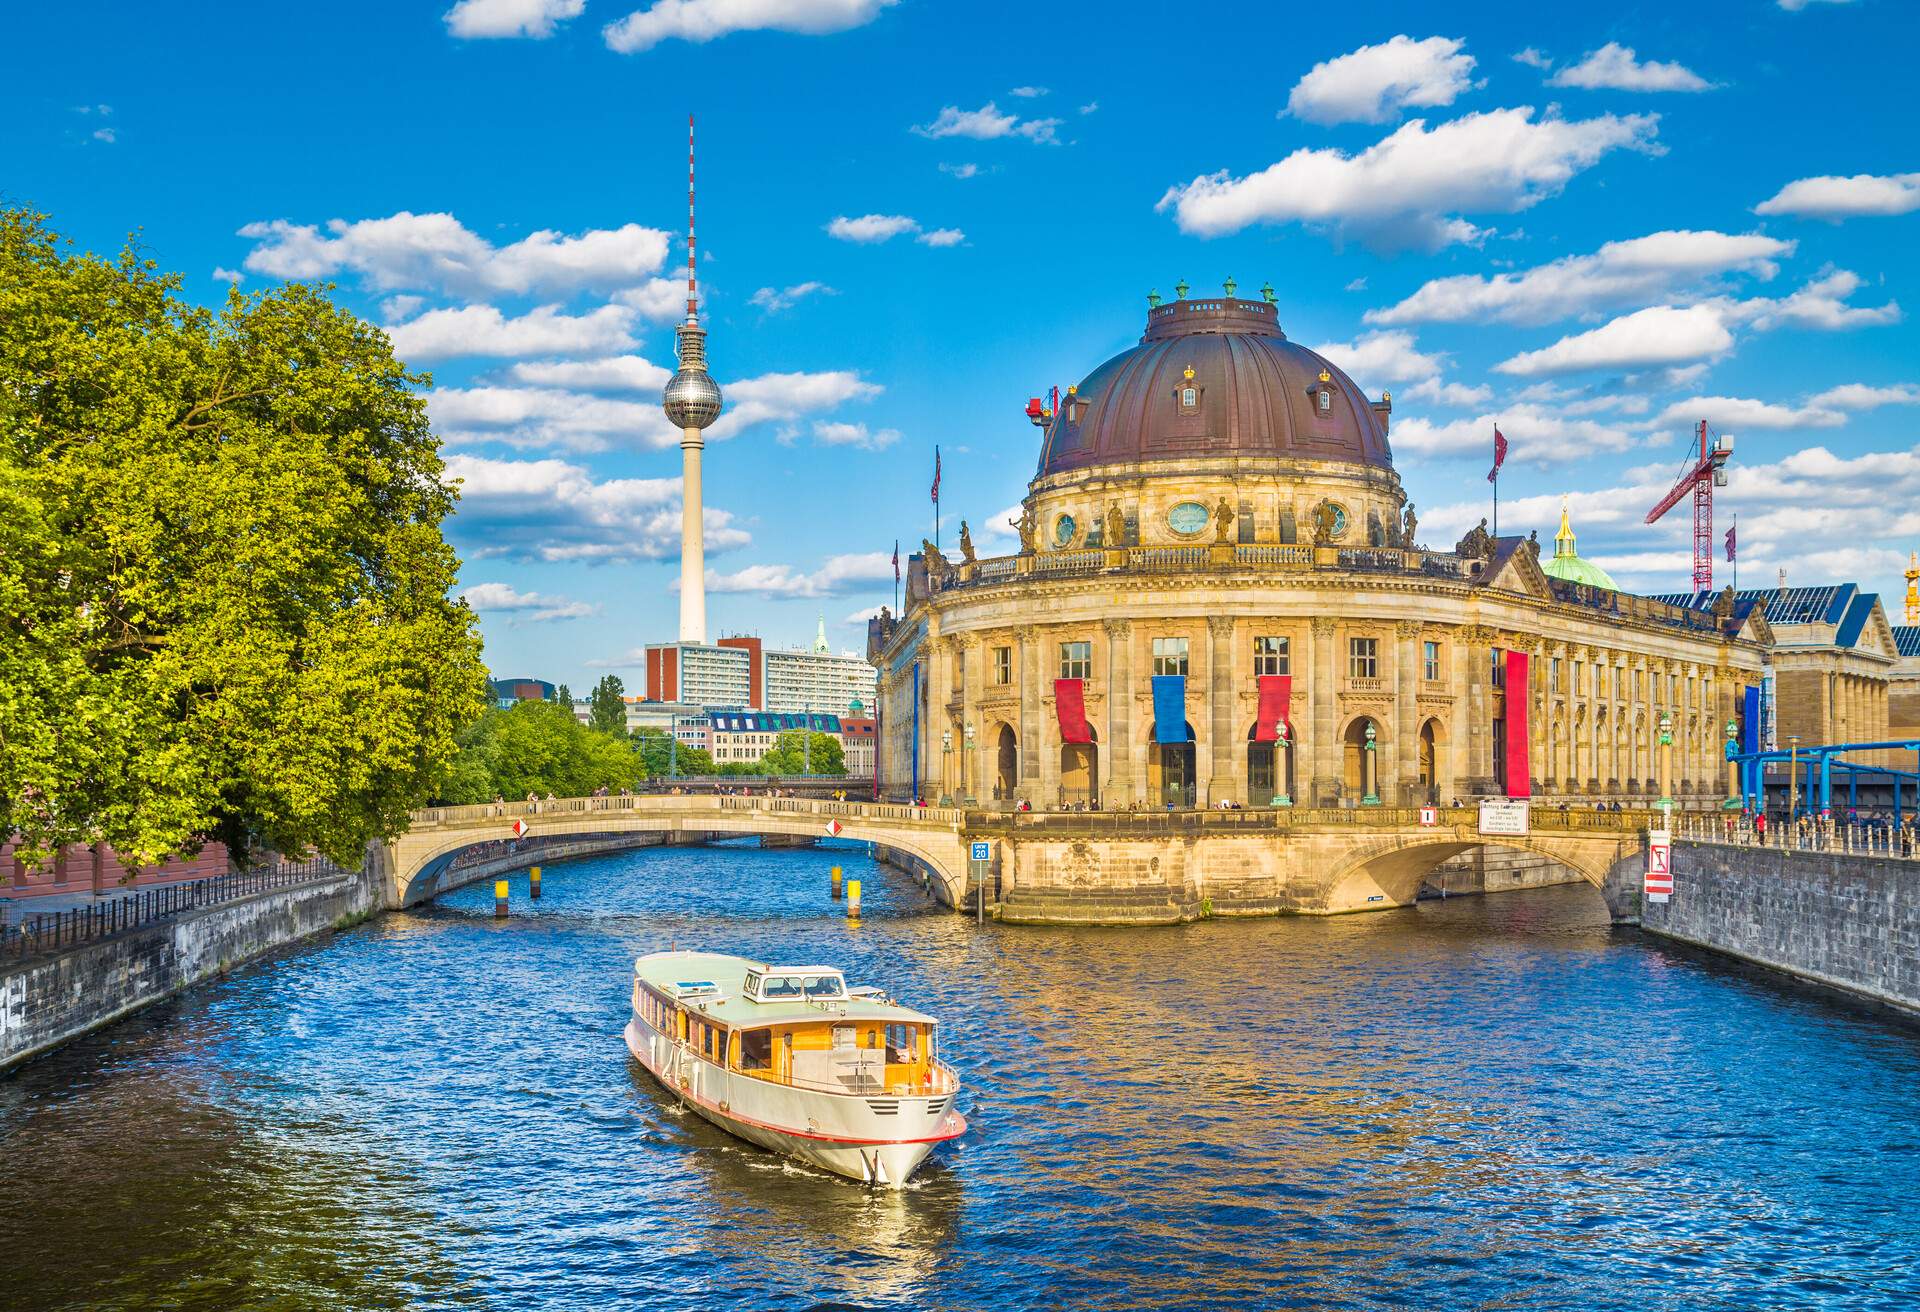 dest_germany_berlin_museumsinsel-shutterstock-premier_314150234_universal_within-usage-period_31388